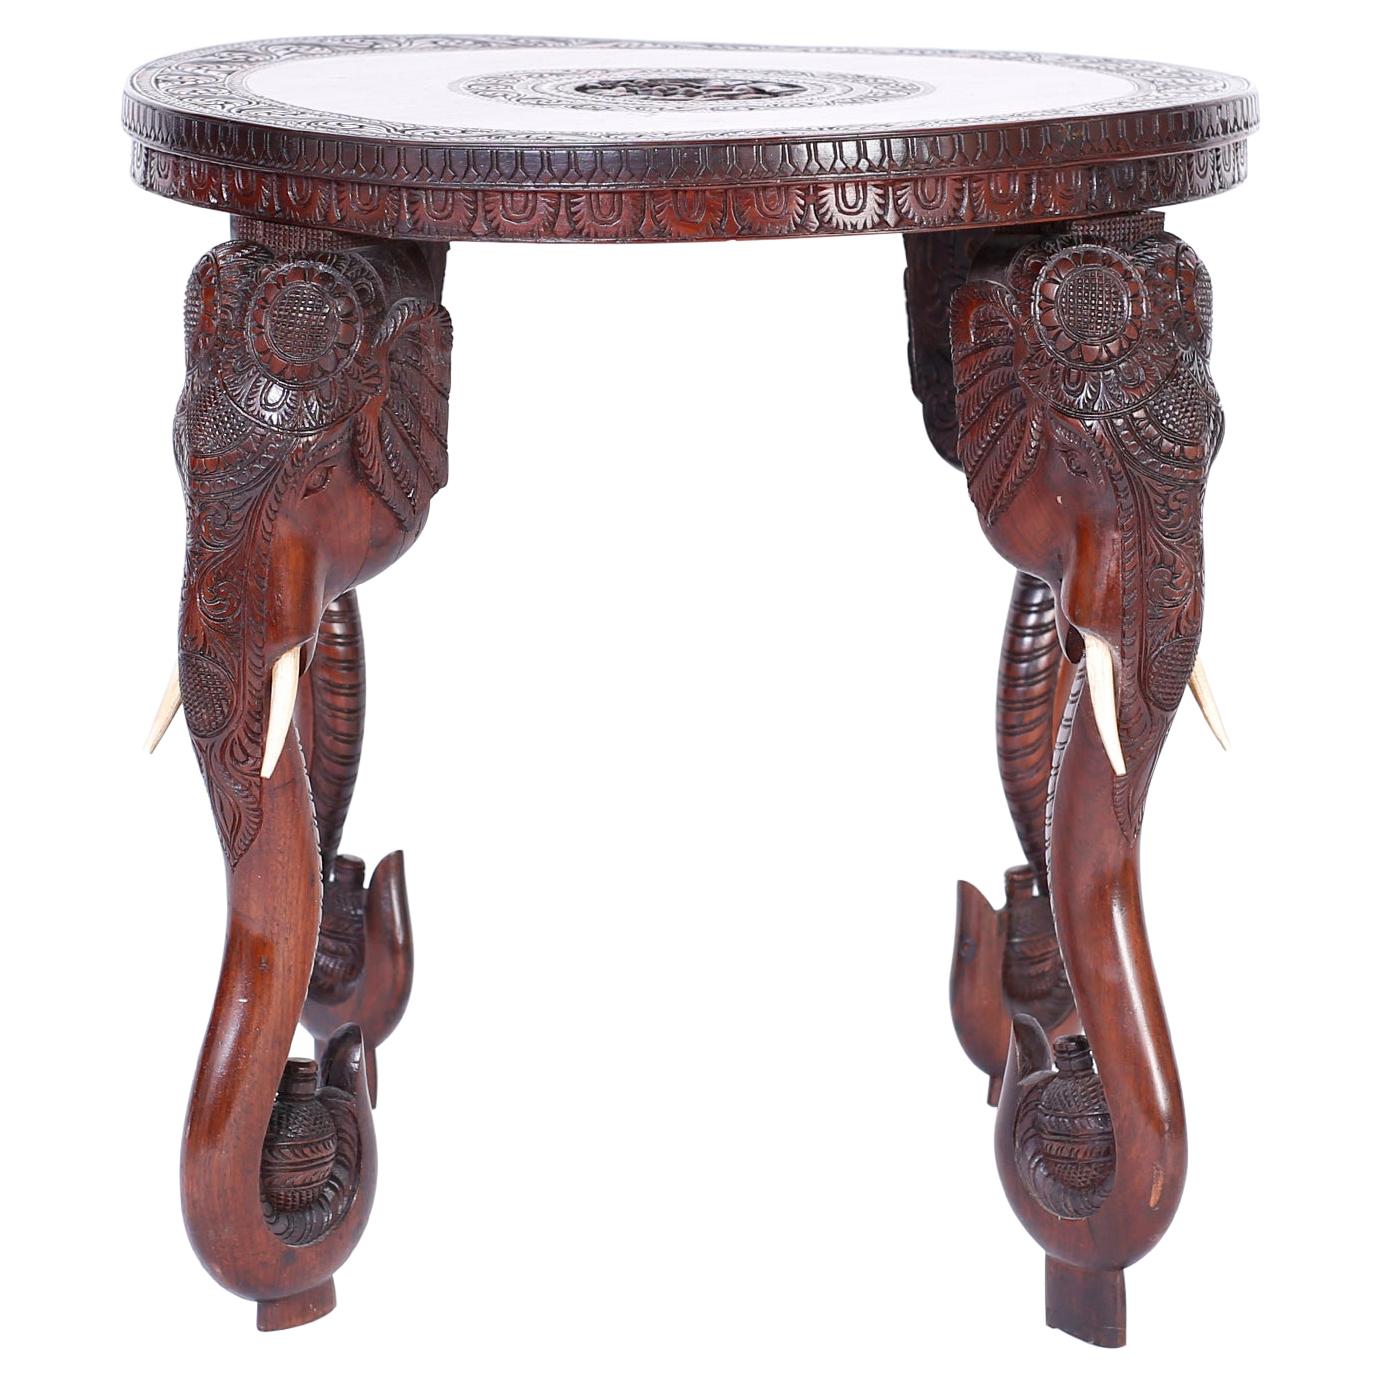 Anglo Indian Carved Wood Round Table with Elephants